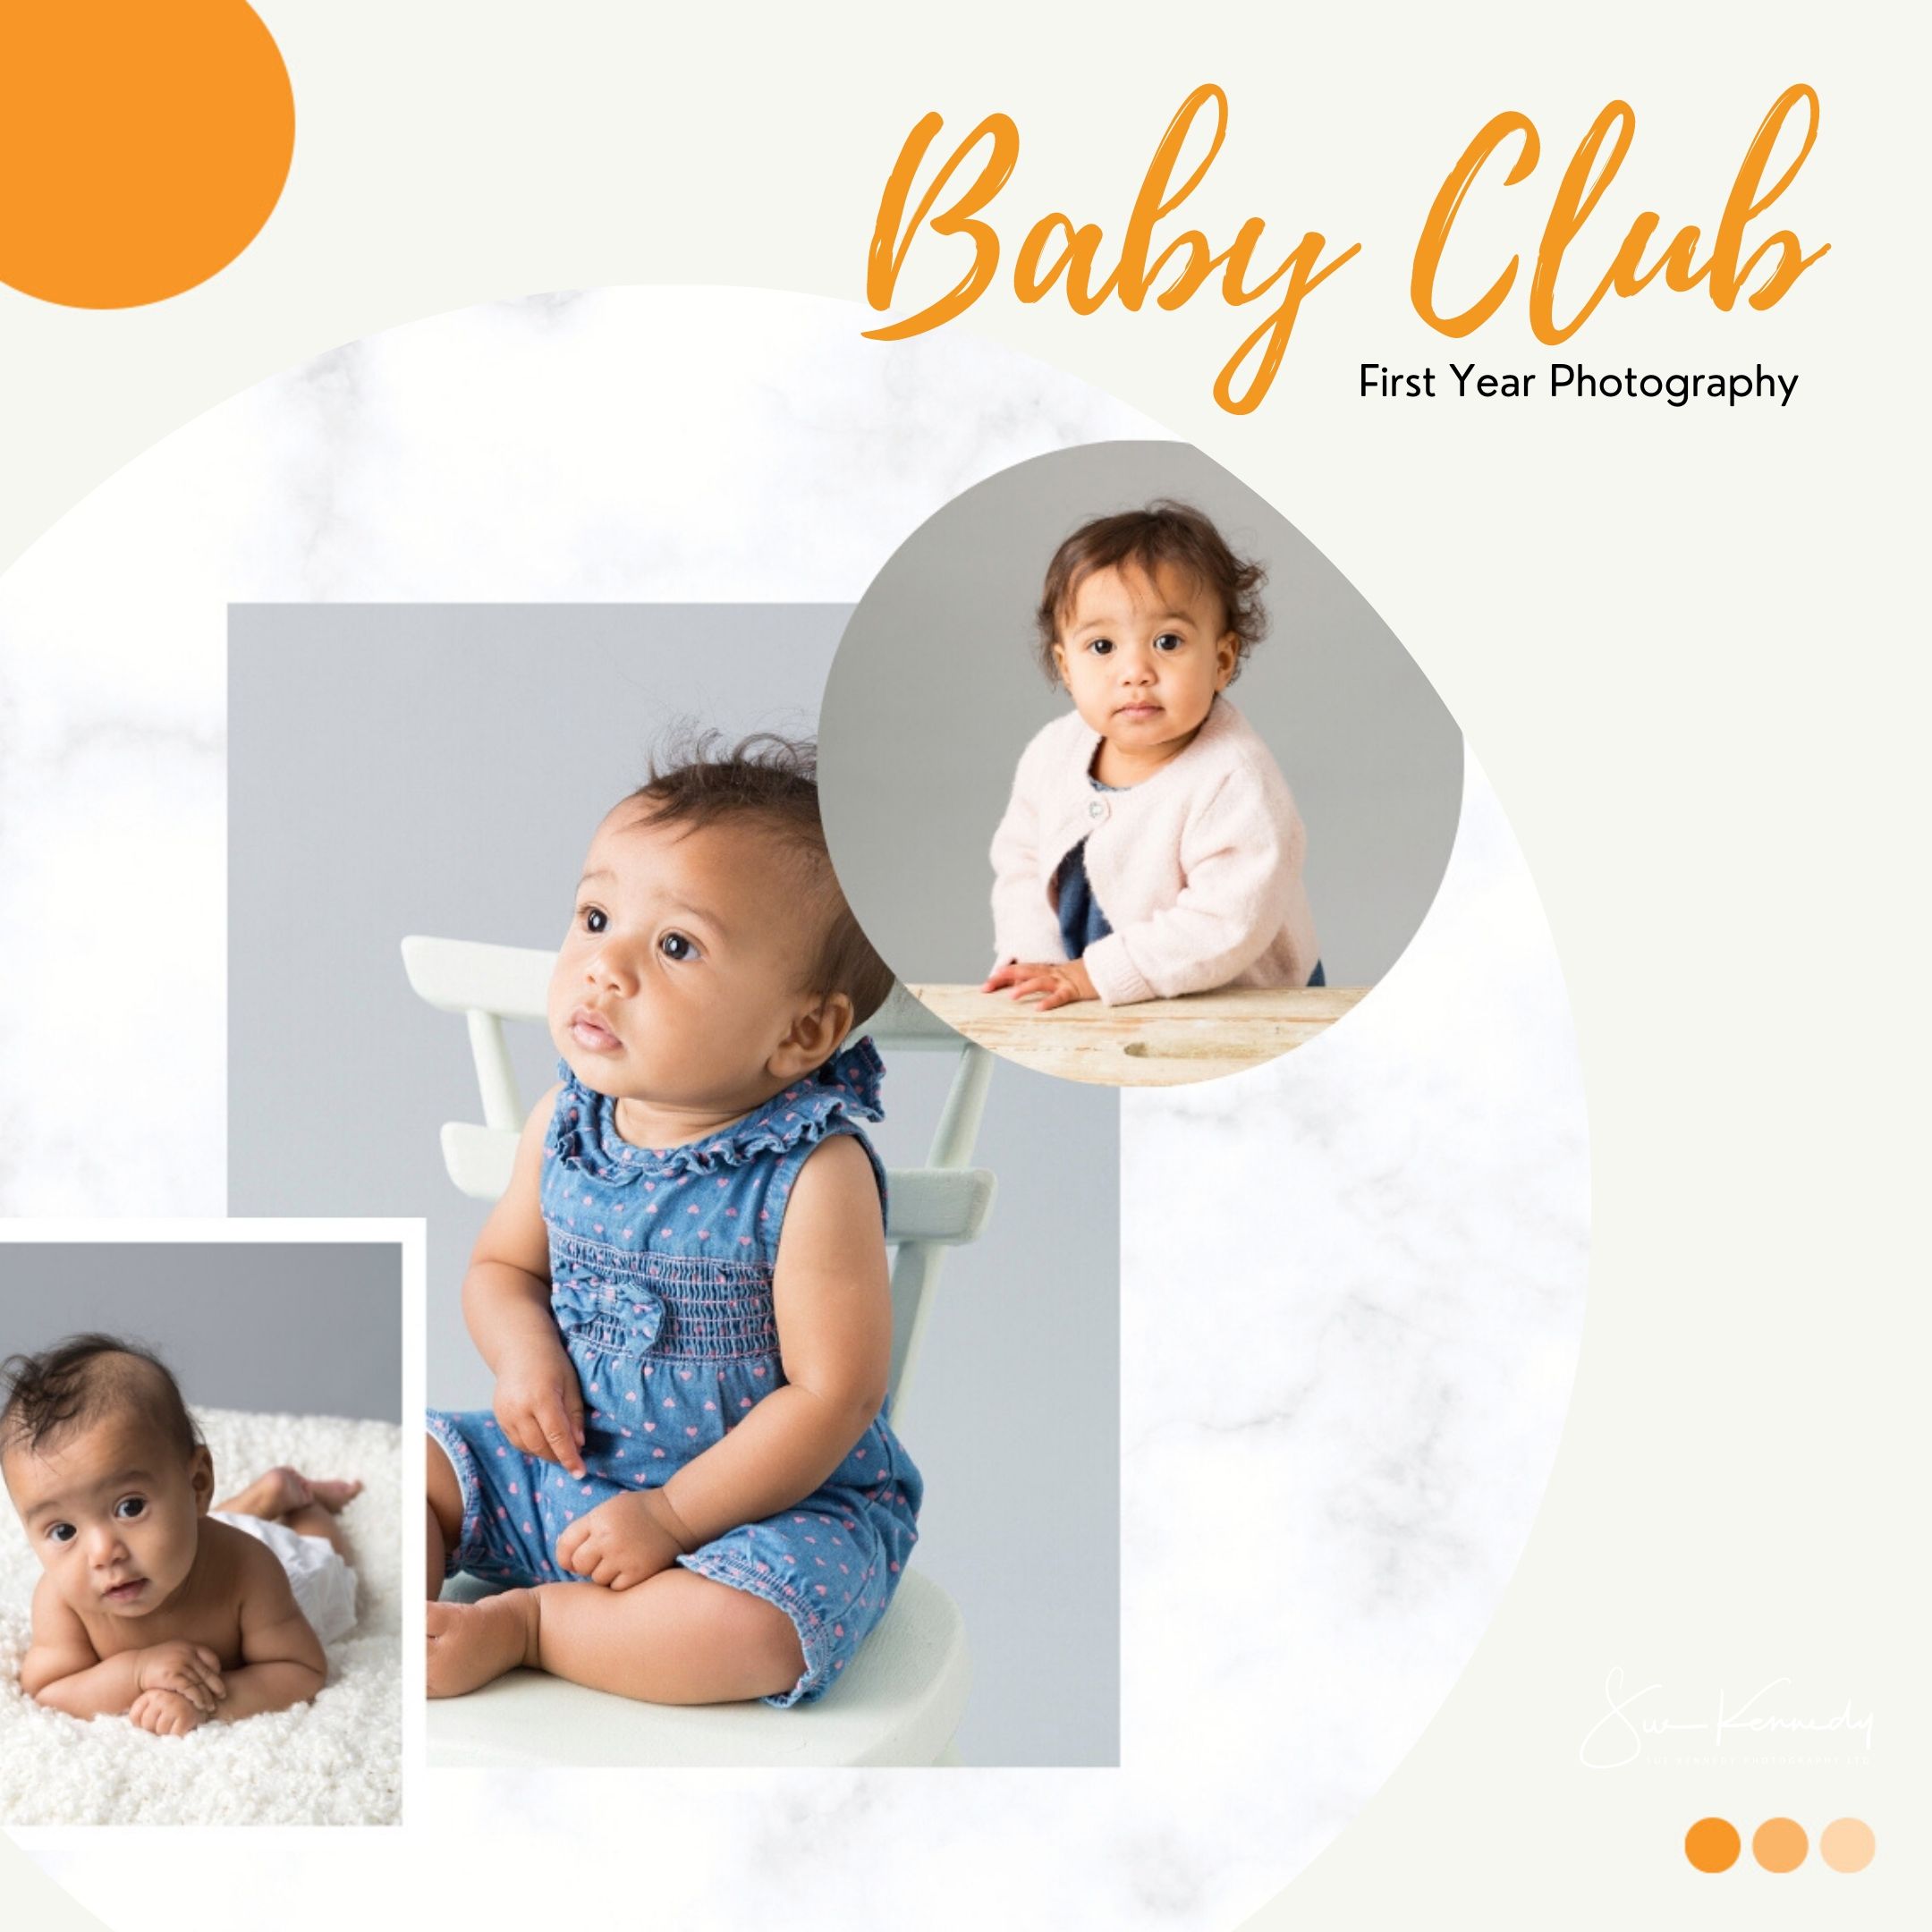 baby milestone photography graphic showing baby at three ages